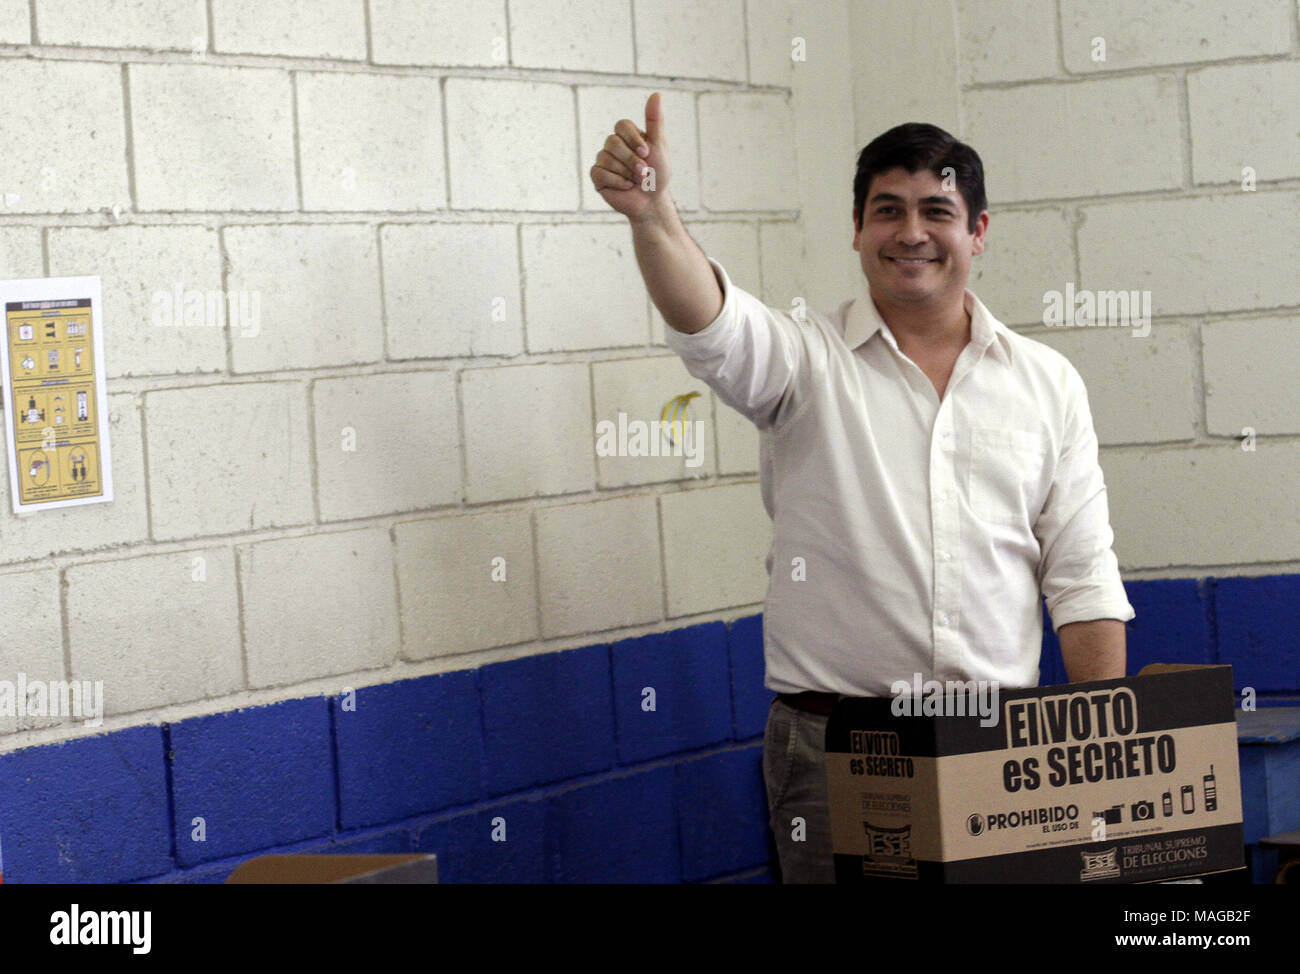 San Jose, Costa Rica. 1st Apr, 2018. Costa Rican presidential candidate Carlos Alvarado, from the Citizen Action Party (PAC), casts his vote at a polling station in San Jose, Costa Rica, on April 1, 2018. Around 3.3 million Costa Ricans are called on Sunday to vote for its 44th president, choosing between evangelical candidate from the National Restoration Party (PRN), Fabricio Alvarado and the official candidate from the Citizen Action Party (PAC), Carlos Alvarado. Credit: Kent Gilbert/Xinhua/Alamy Live News Stock Photo